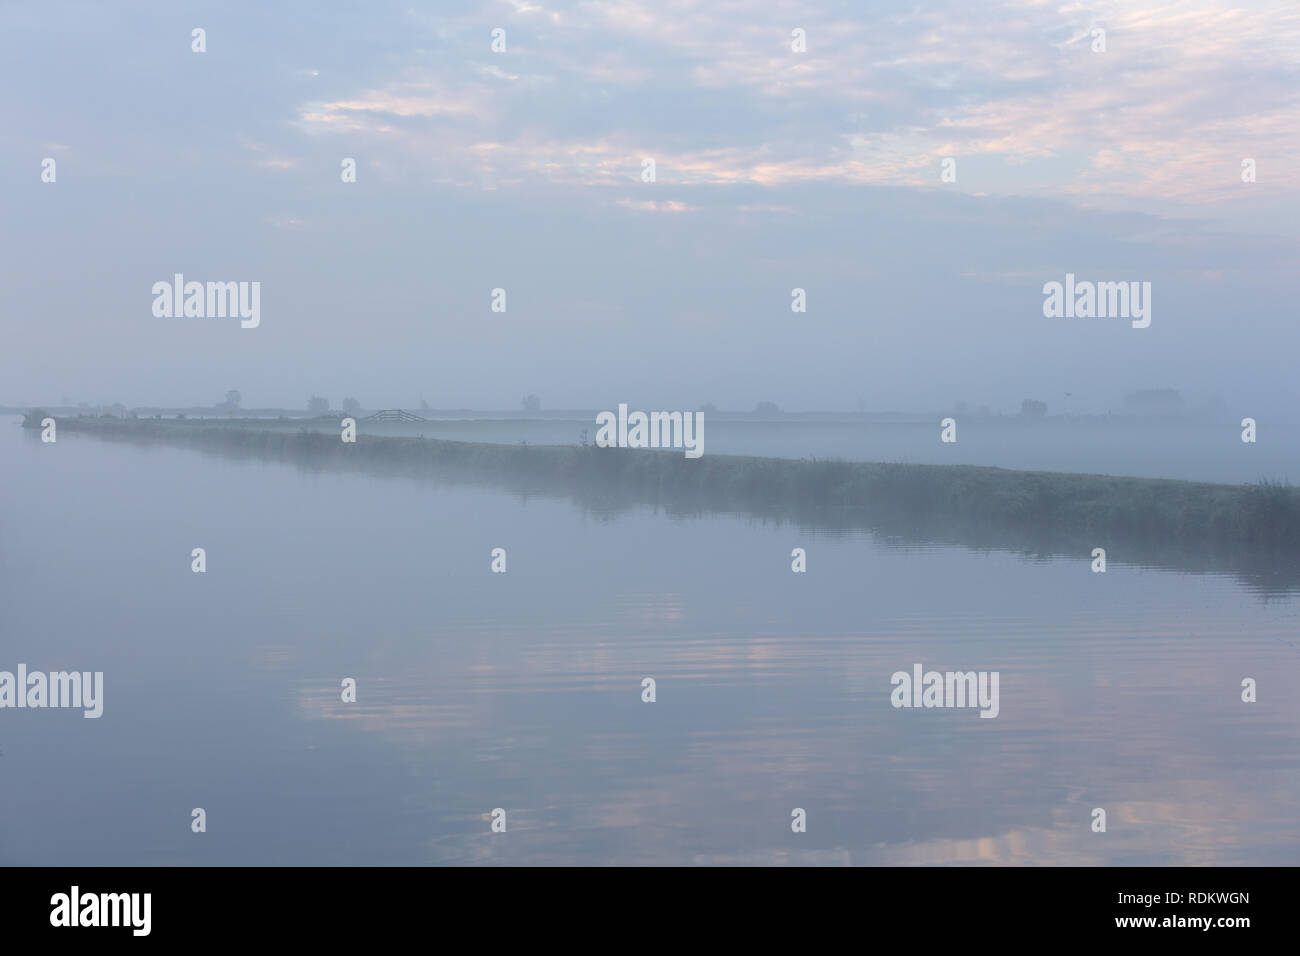 A foggy morning water landscape of the Norremeer of the Kagerplassen in South-Holland The Netherlands. Stock Photo